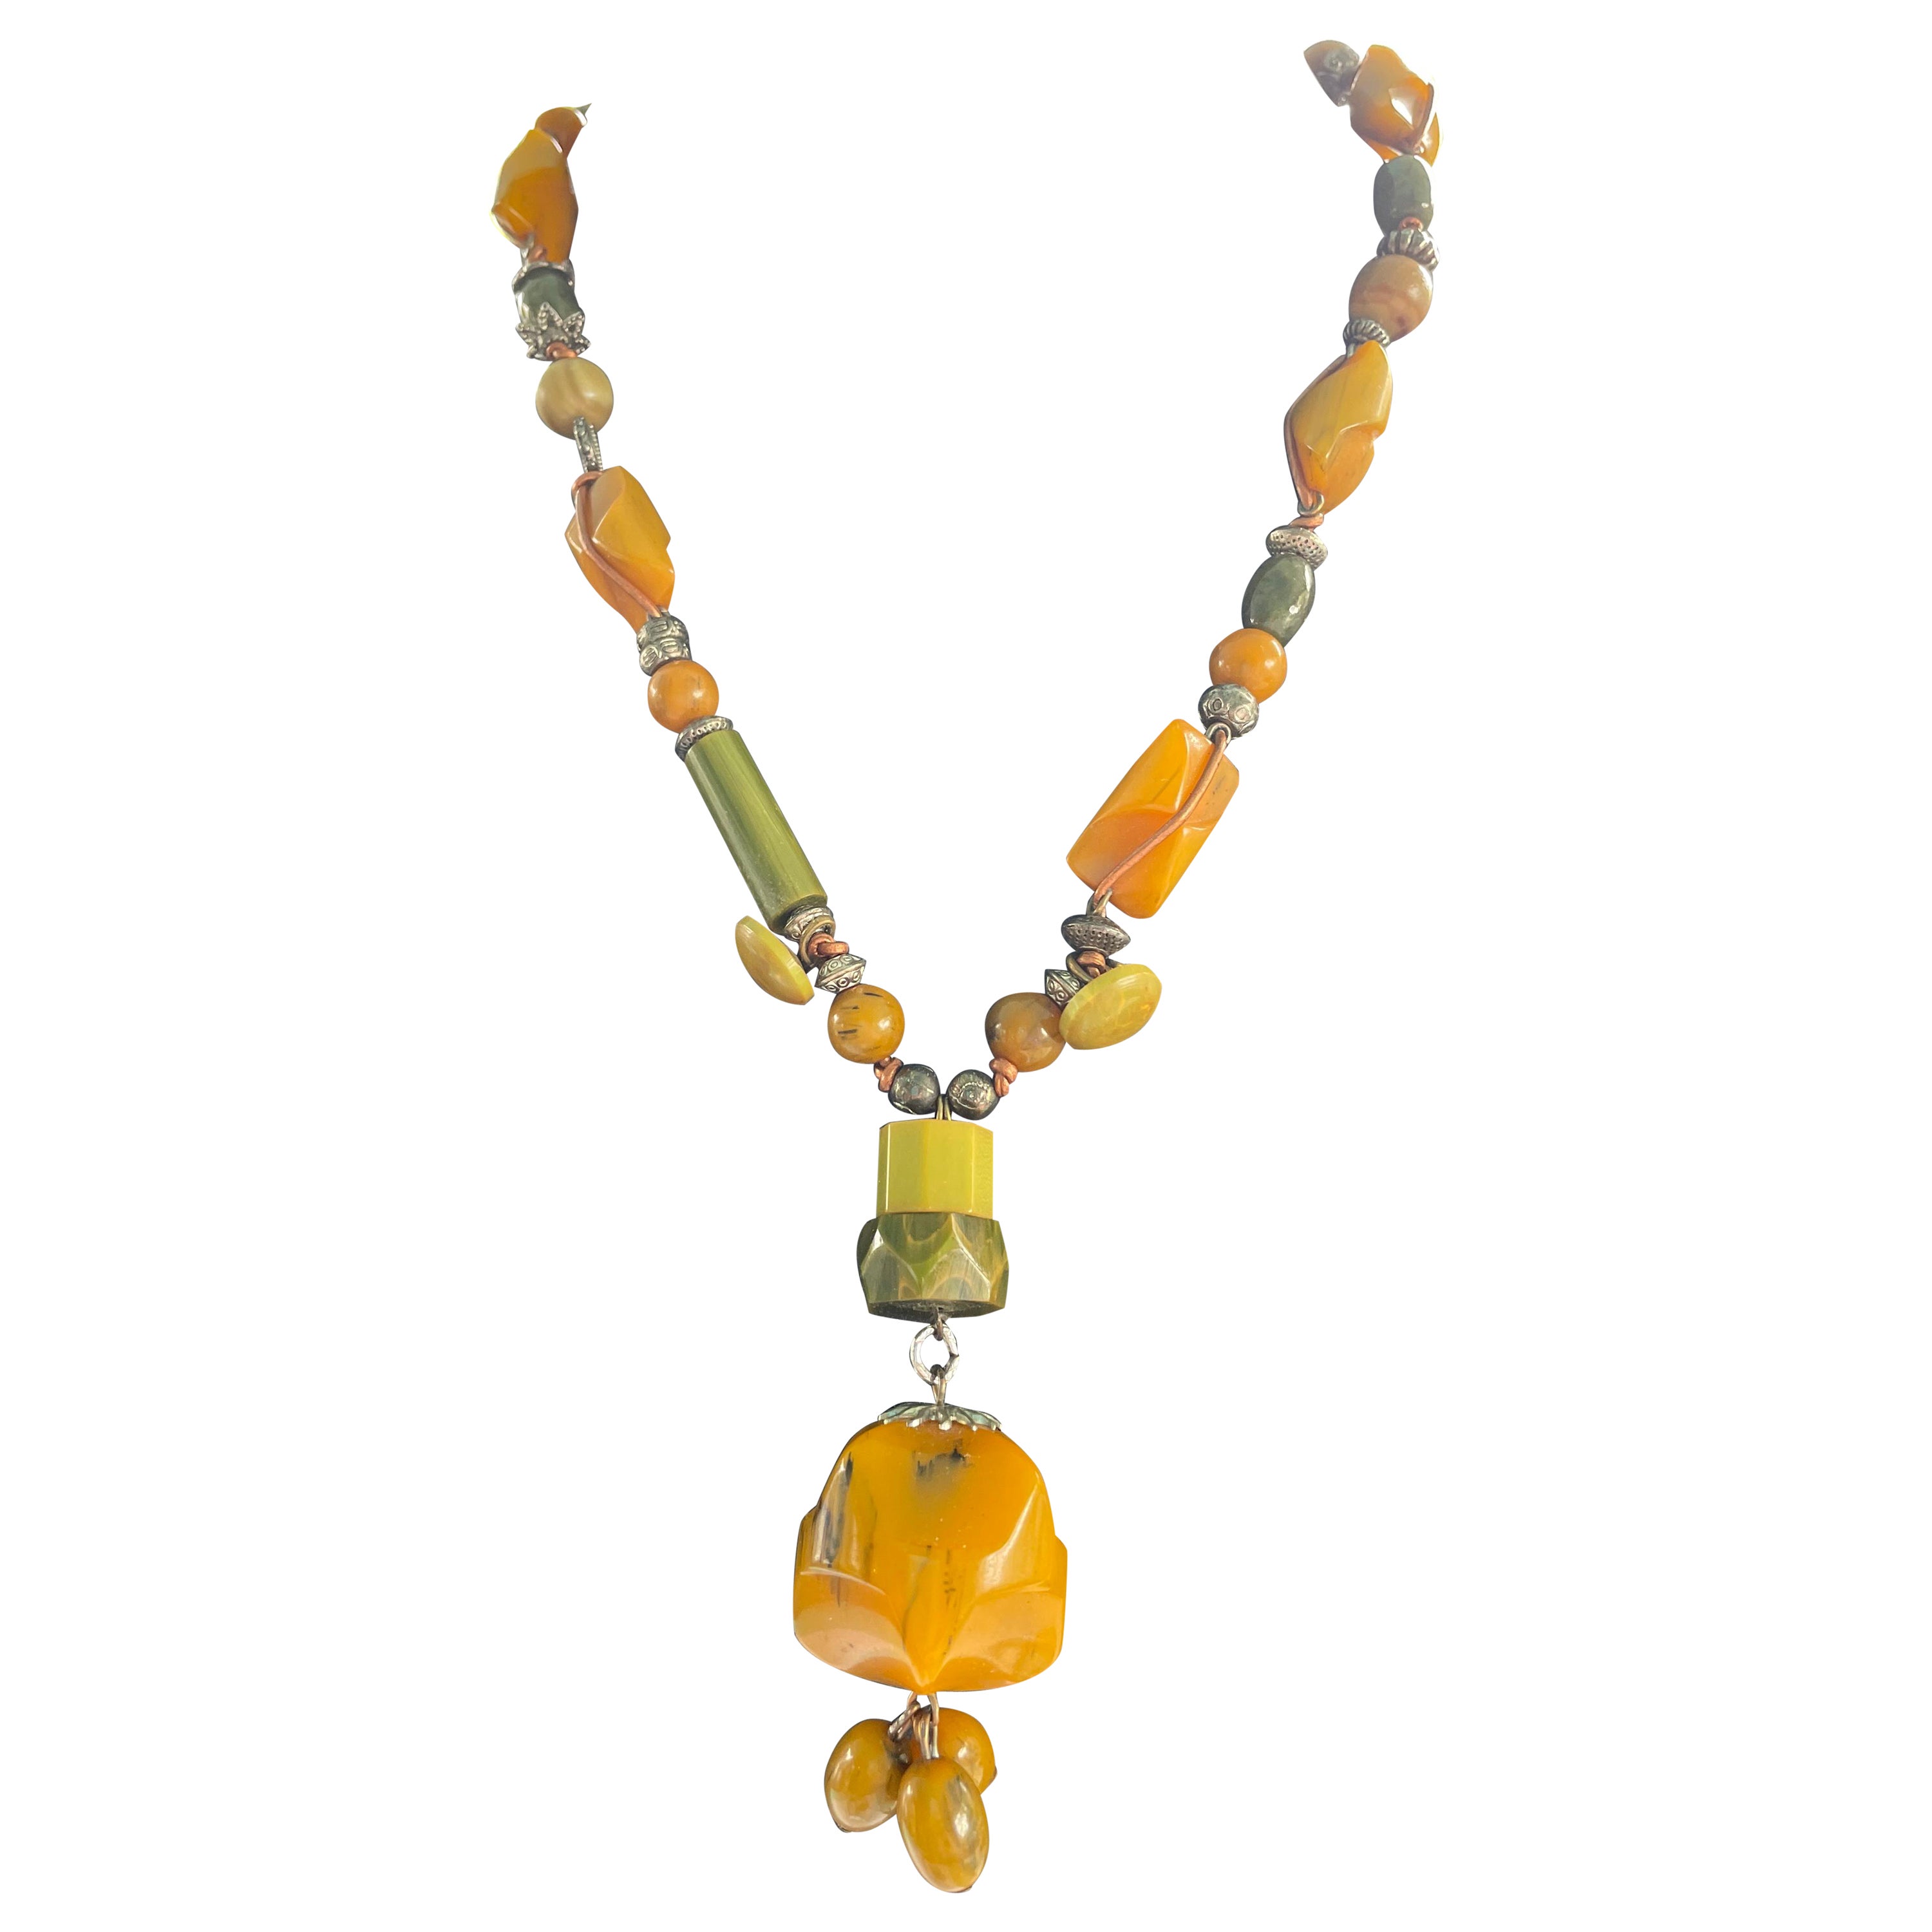 Lorraine’s Bijoux offers a handmade, one of a kind, necklace of Bakelite beads. For Sale